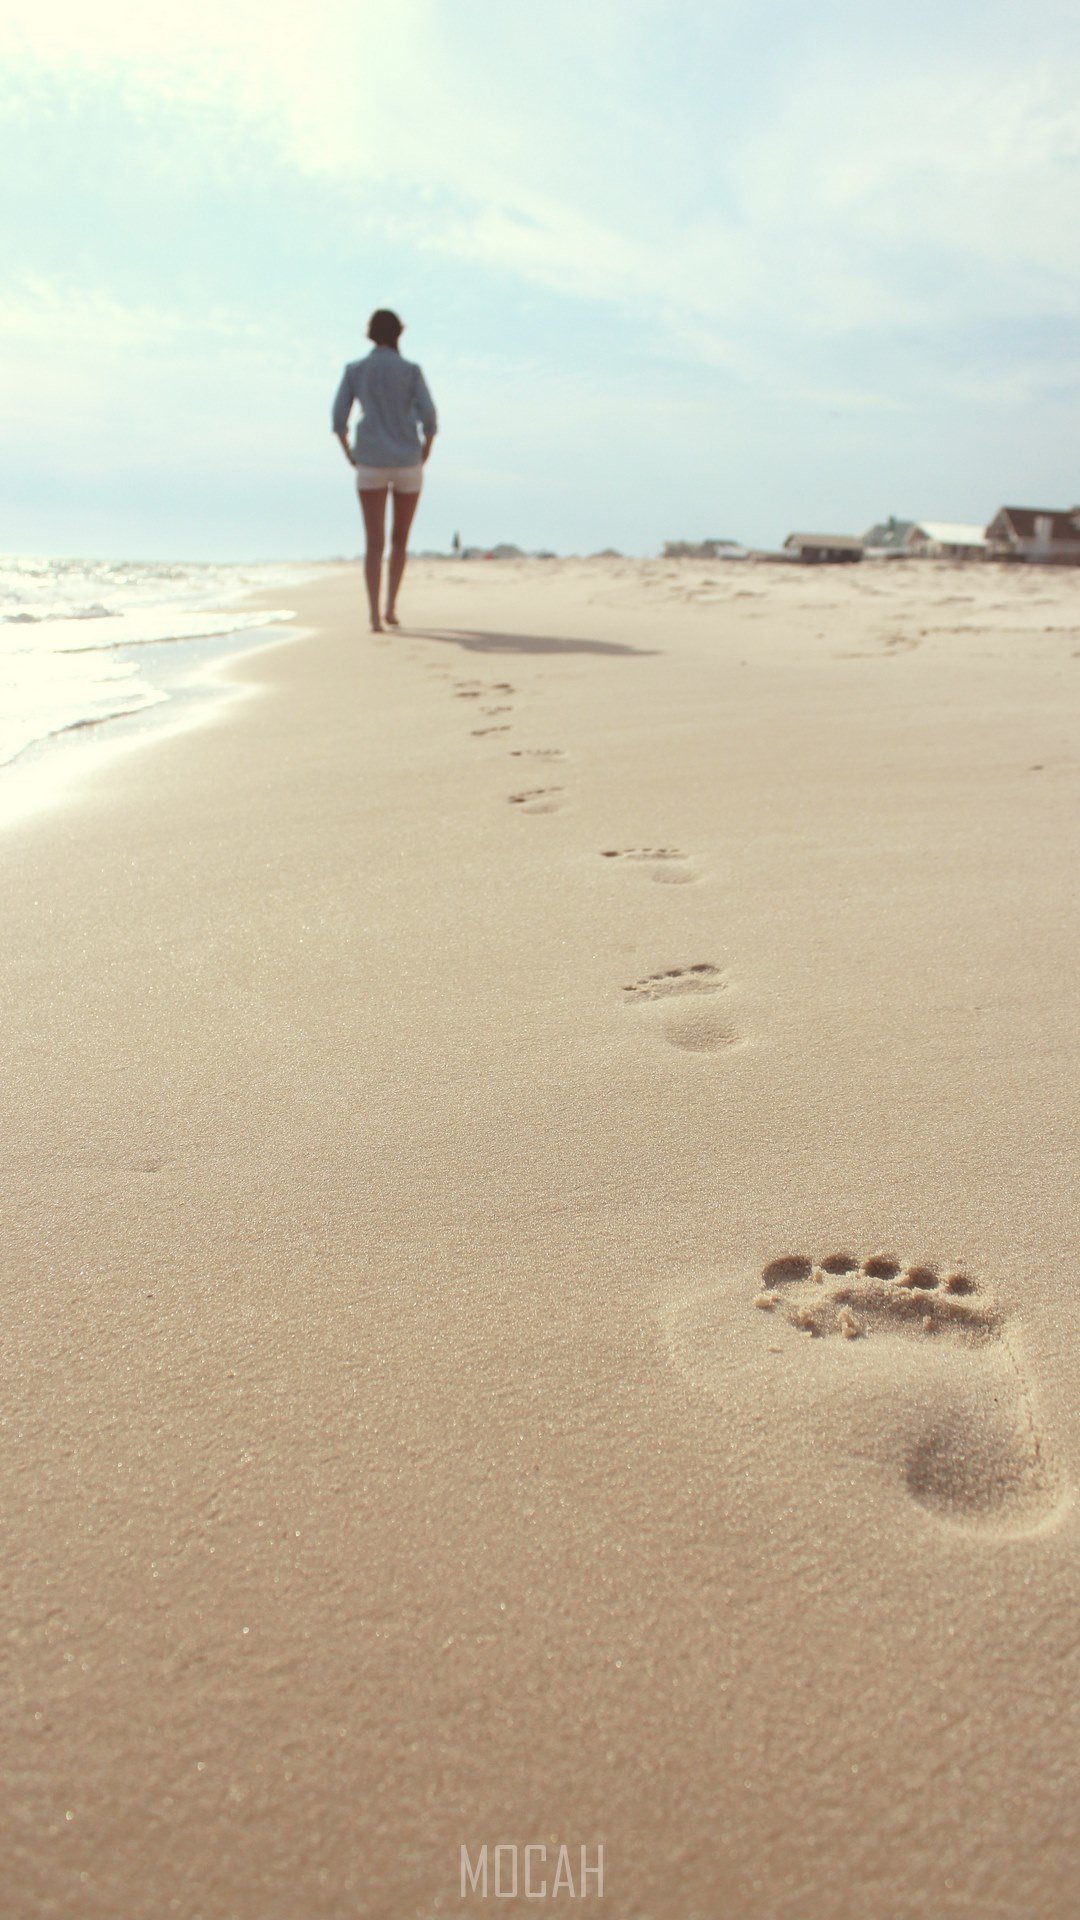 footsteps of a woman walking on a sand beach, one foot in front of the other, Xiaomi Mi Max 2 HD download, 1080x1920. Mocah HD Wallpaper